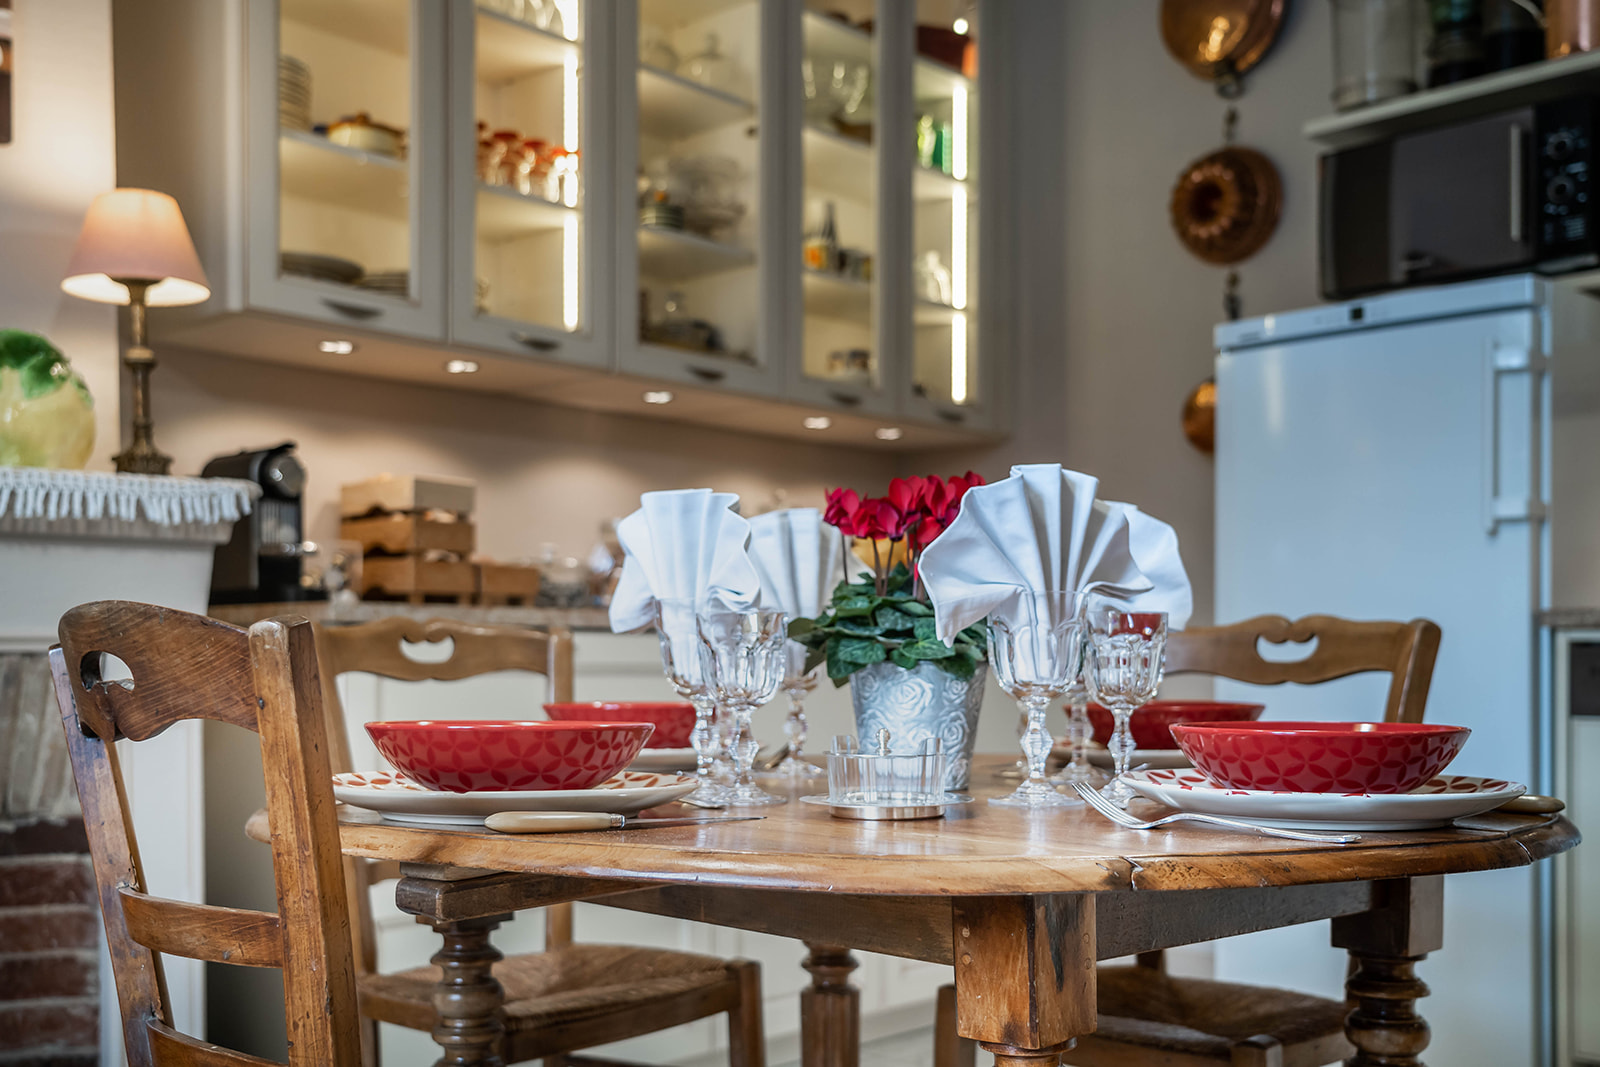 cuisine-style-campagne-chic-blanche-ambiance-deco-table-vazard-home-cuisines-neubourg-louviers